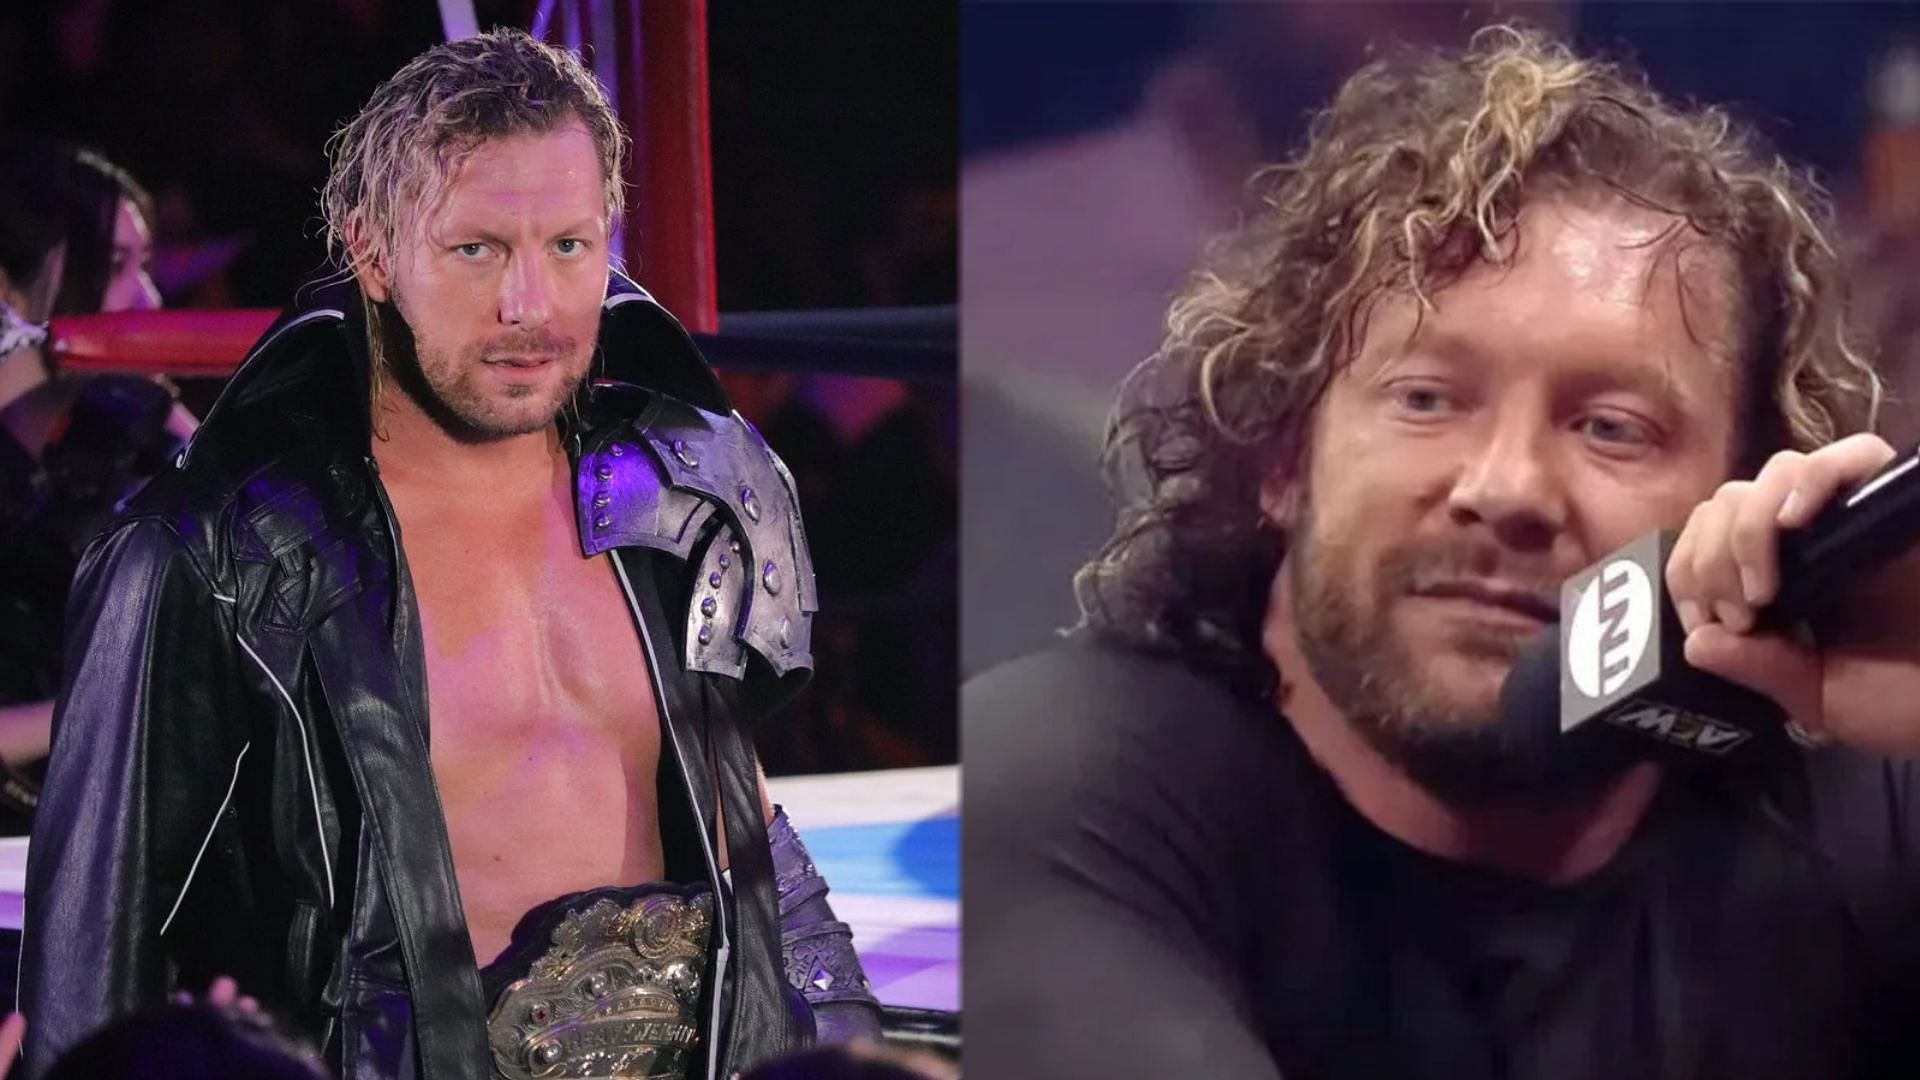 Kenny Omega recently captured the IWGP United States Heavyweight Championship.